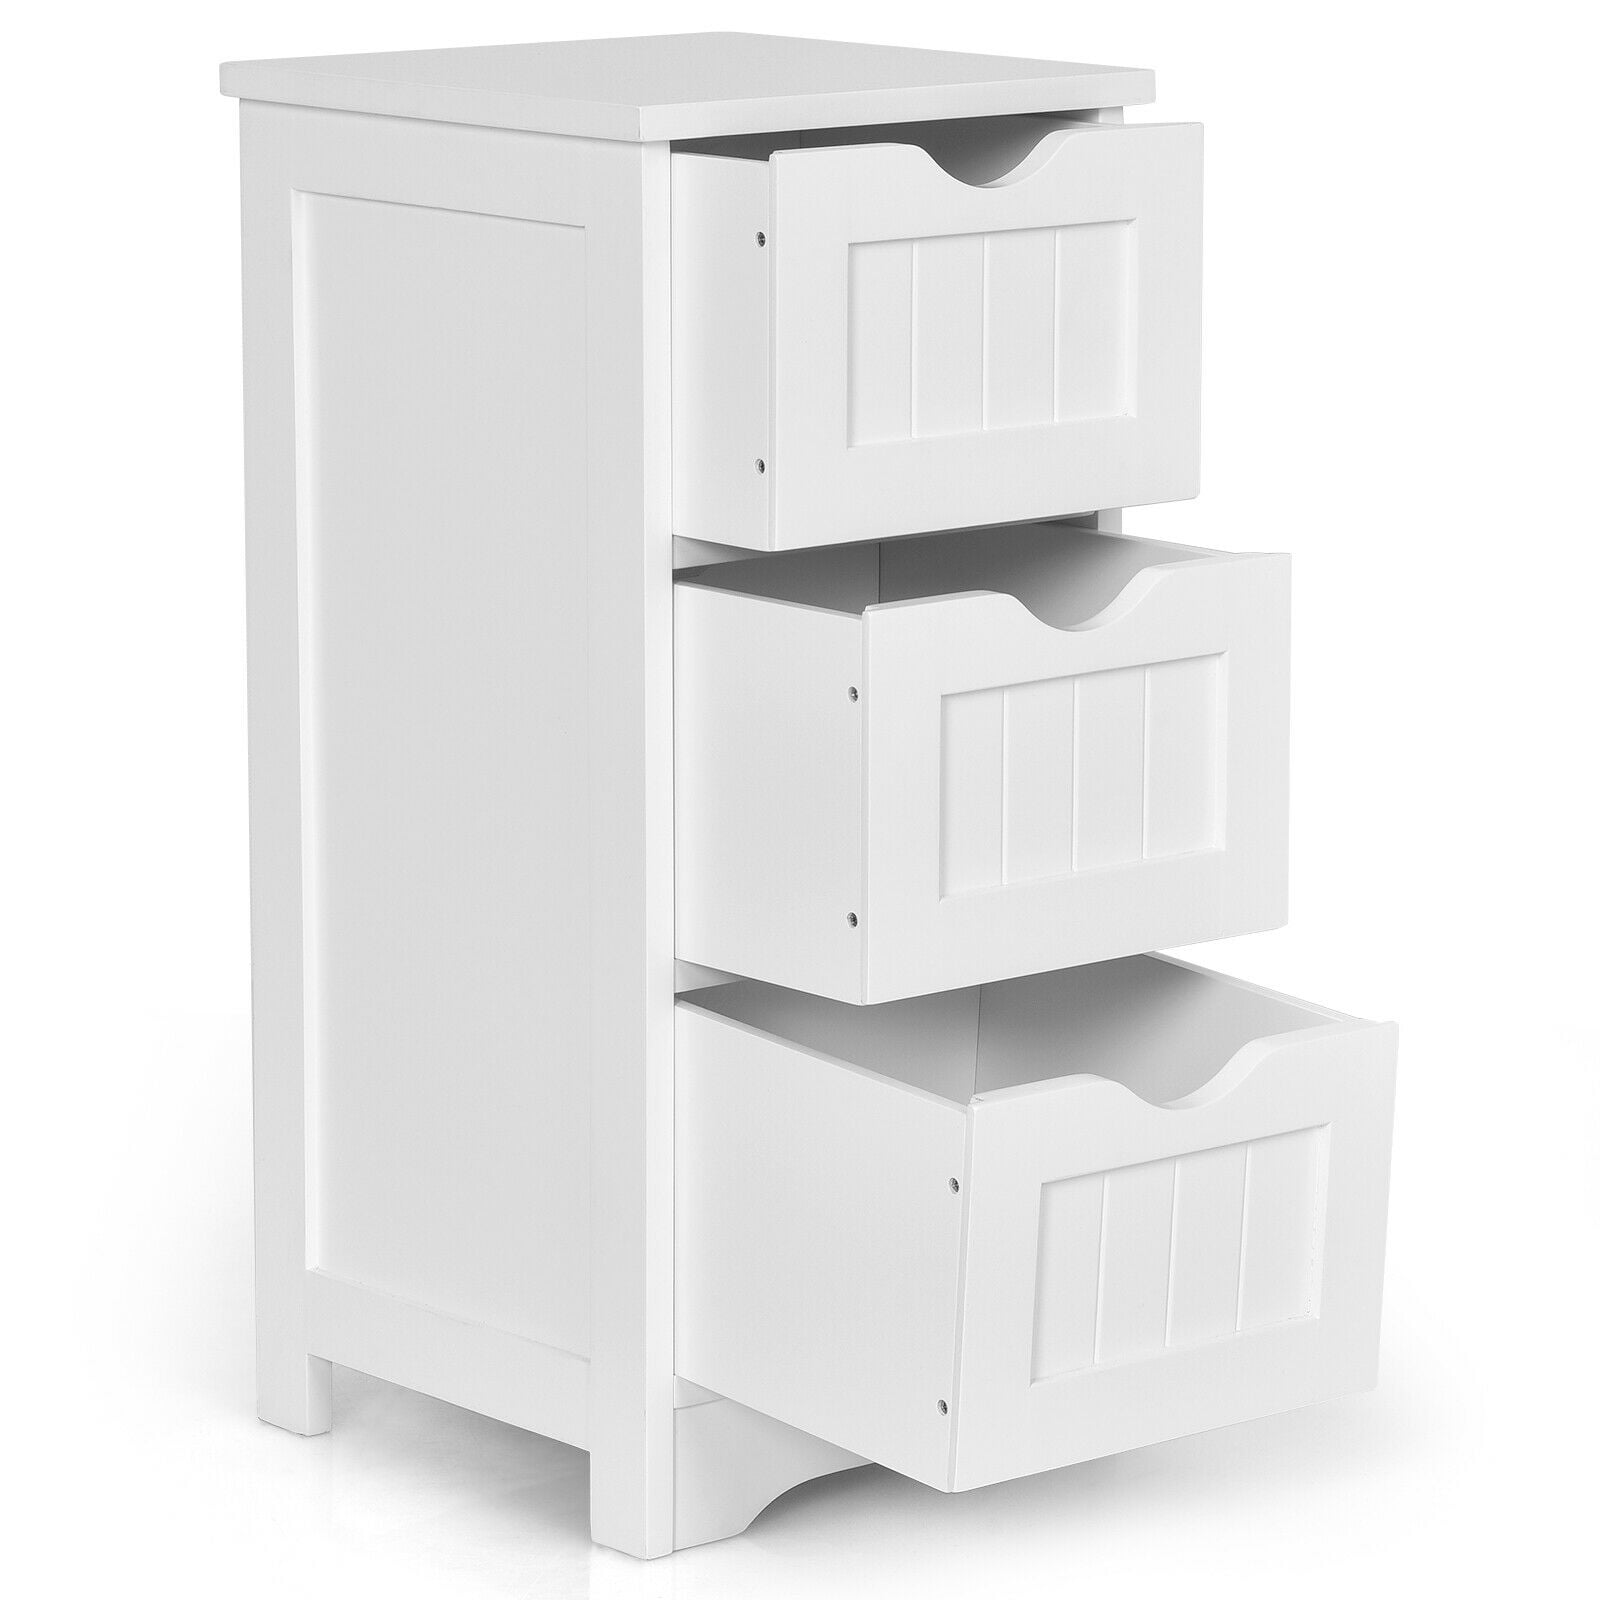 Doors Kitchen Garage Cabinet Lego X4 New White Cupboard Container W/ Drawers